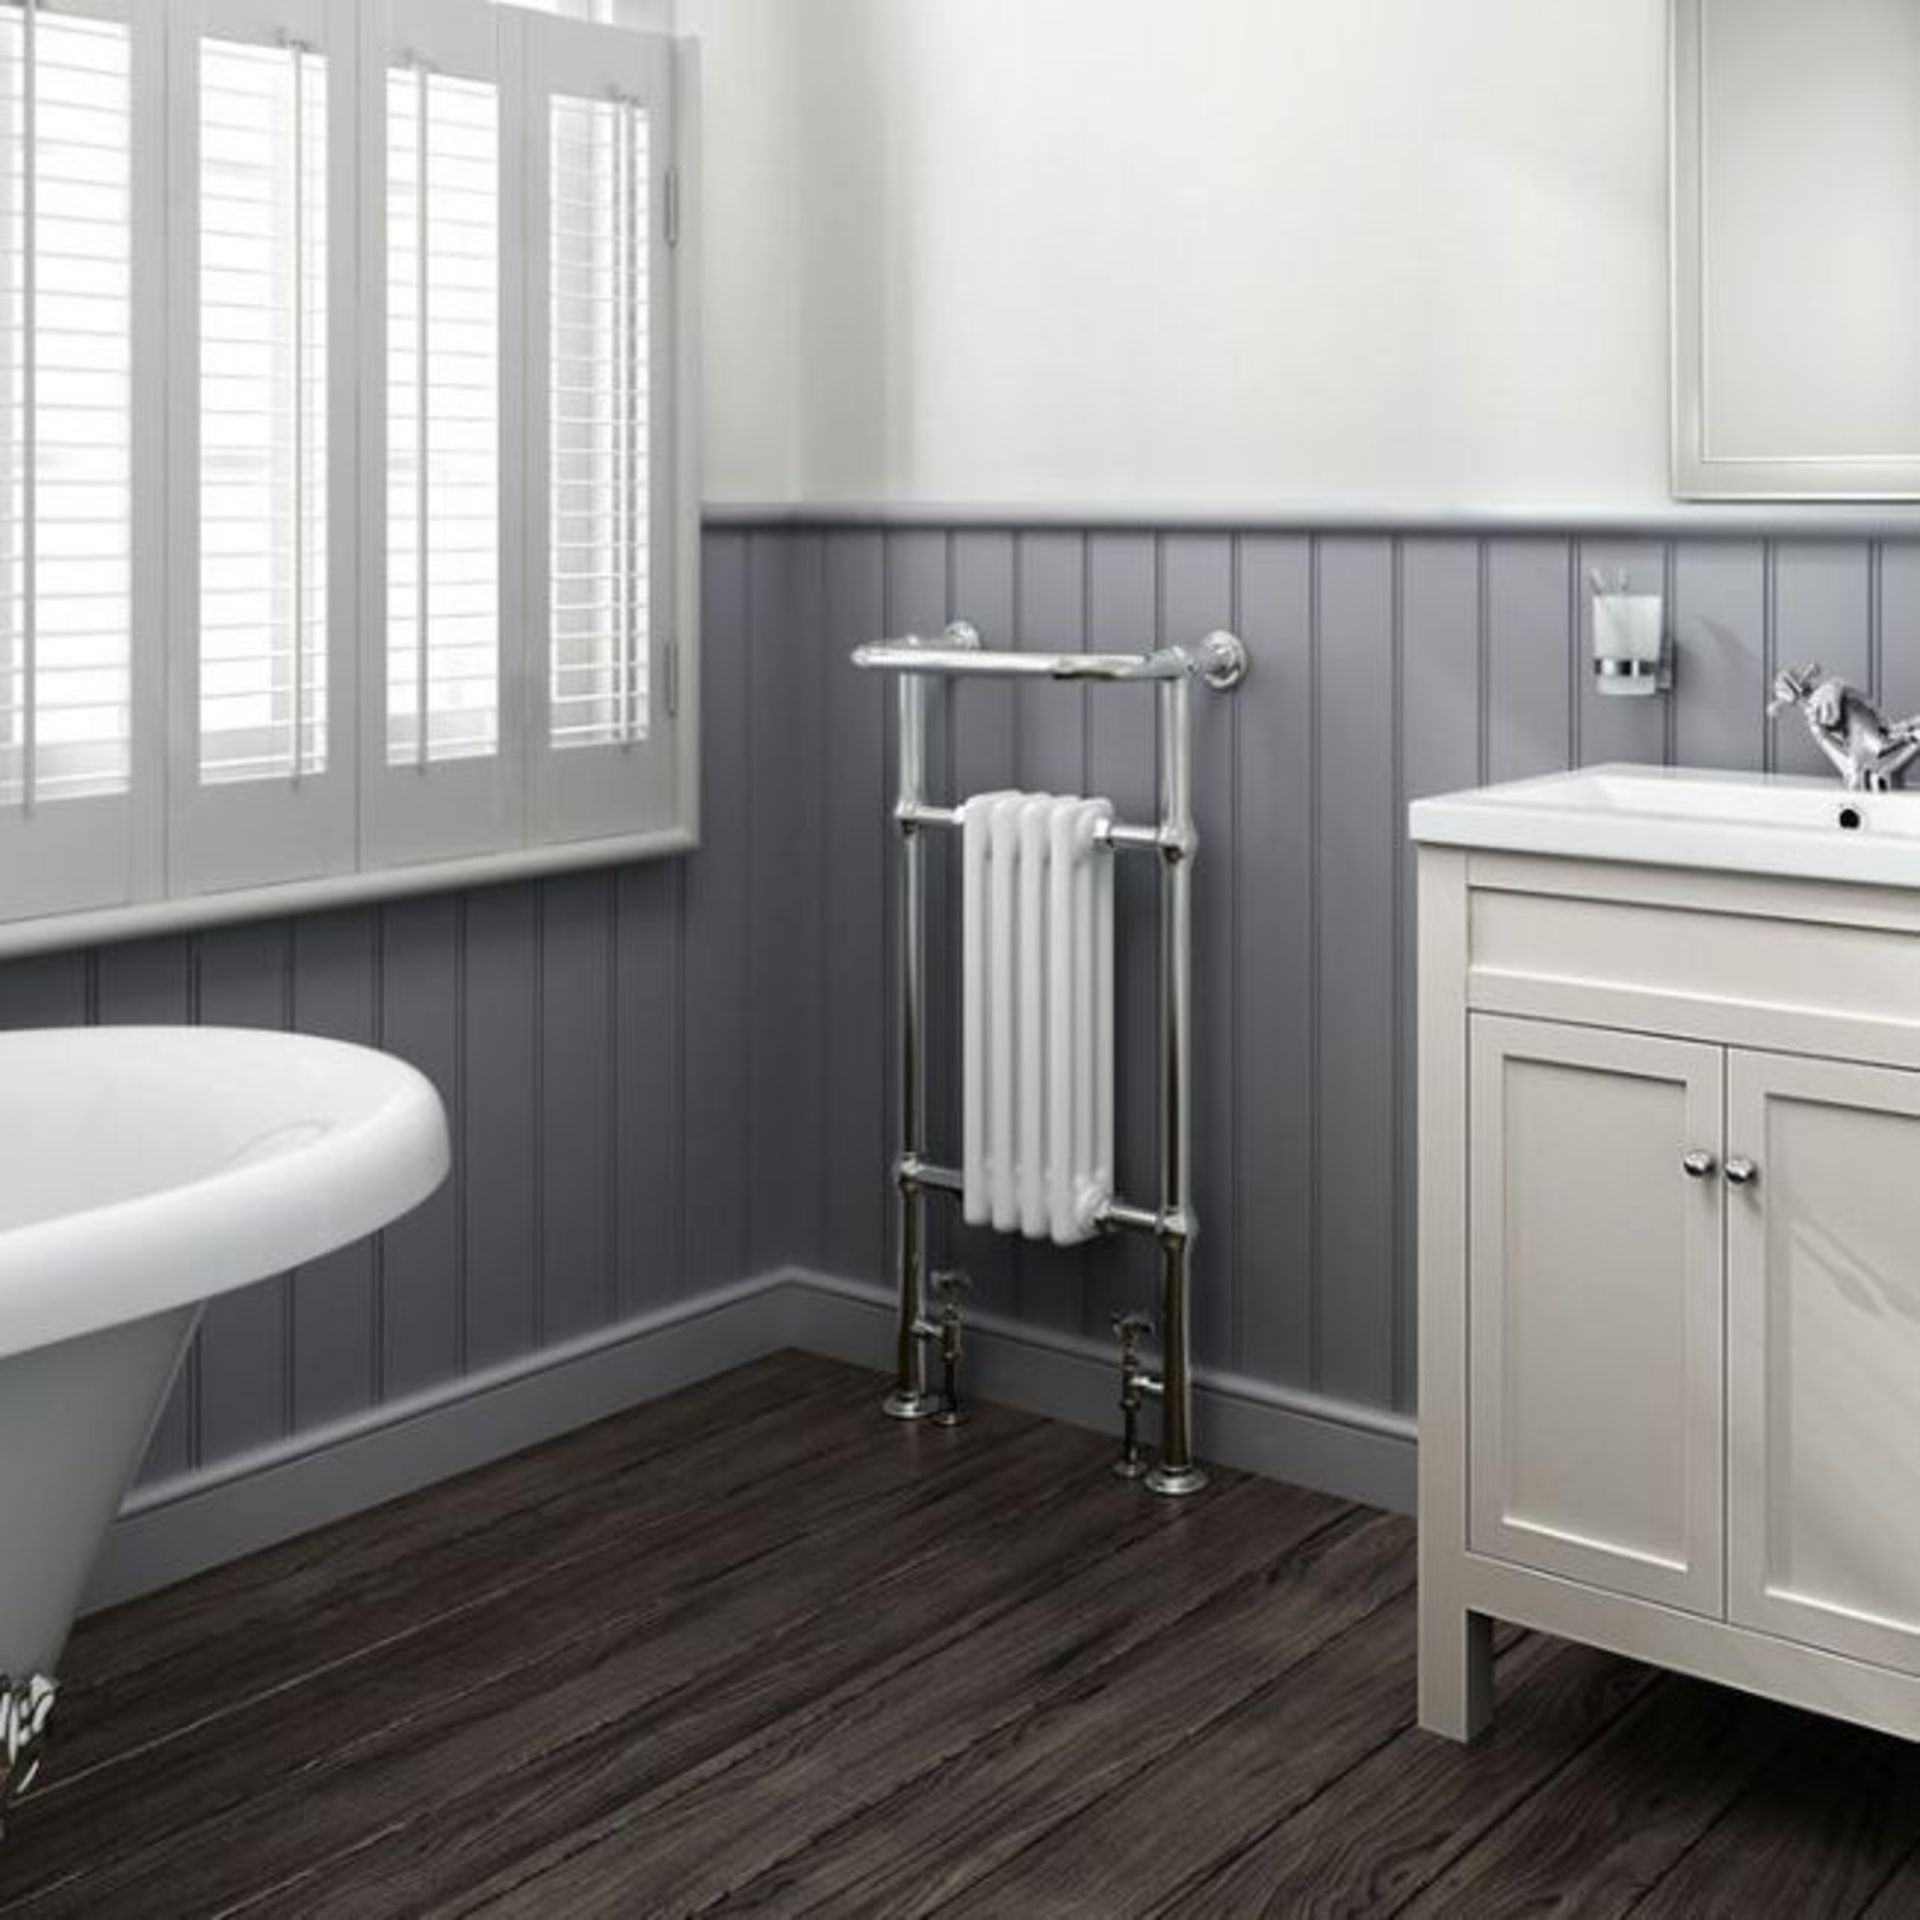 (Z54) 952x479mm Small Traditional White Towel Rail Radiator - Cambridge. RRP £449.99.We love ... - Image 2 of 2